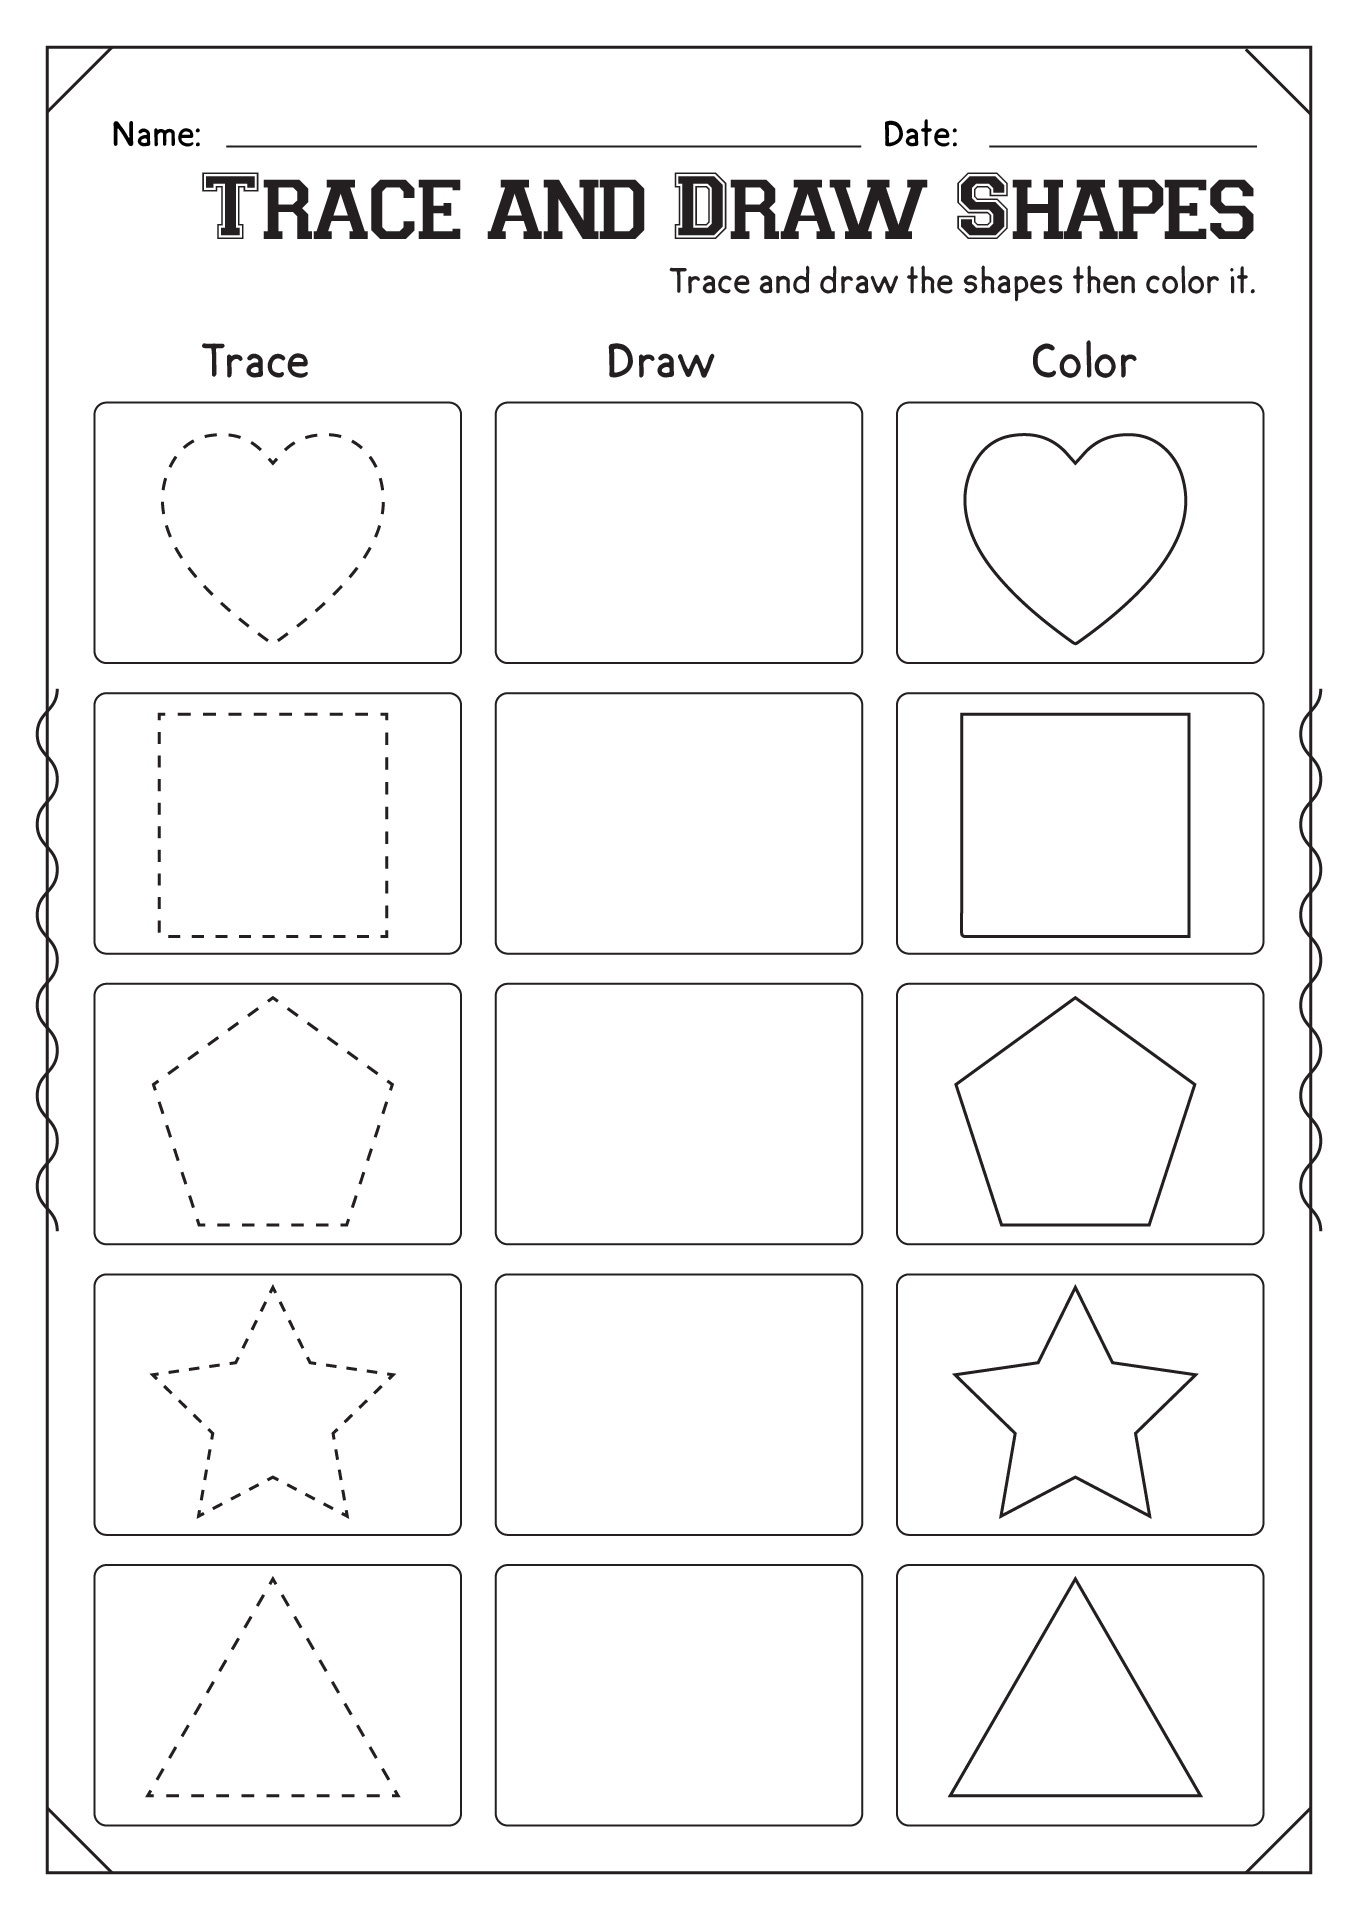 Trace and Draw Shapes Worksheet Image